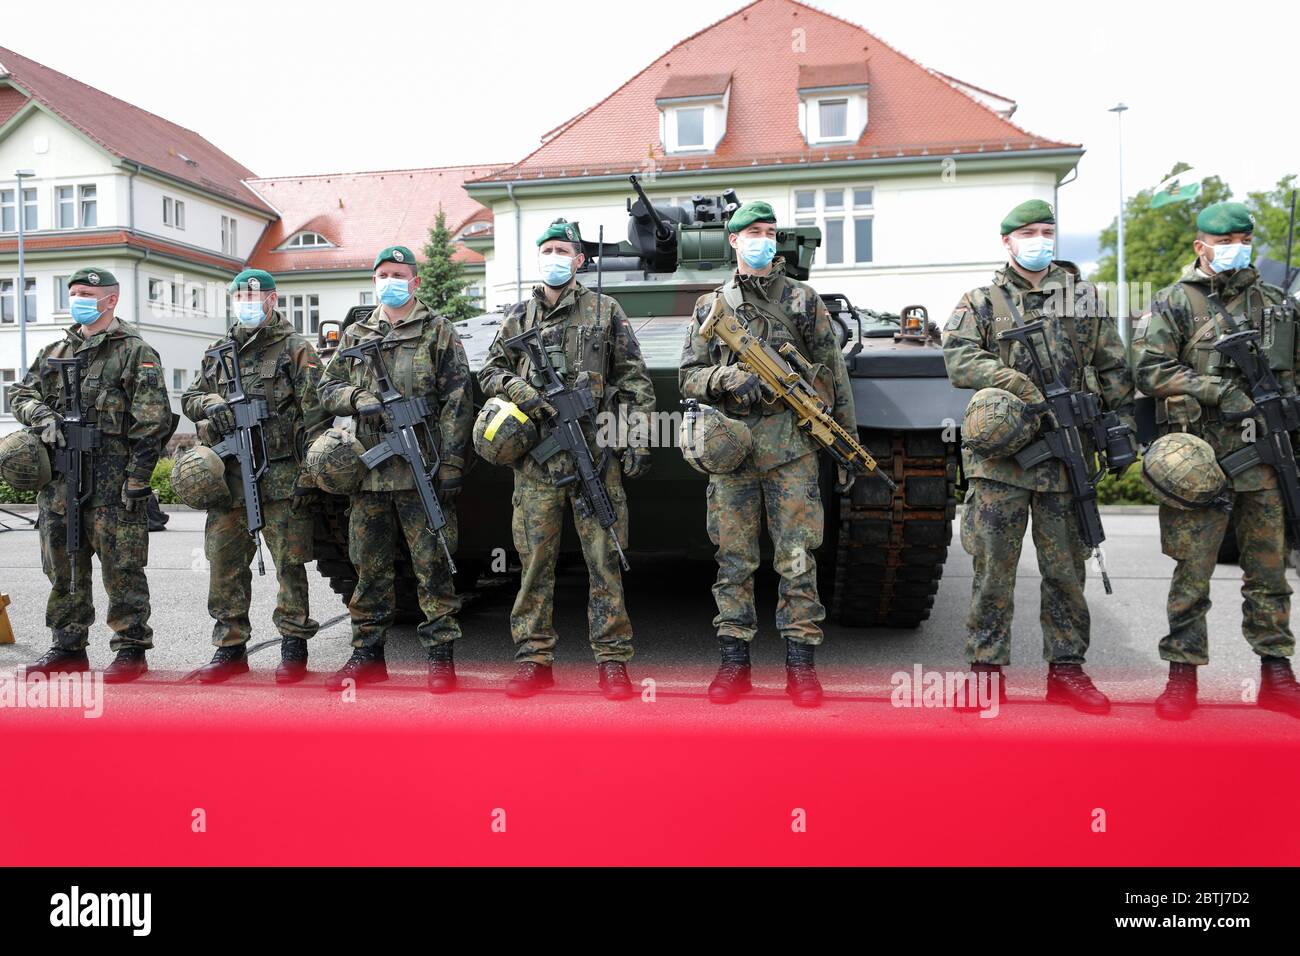 26 May 2020, Saxony, Frankenberg: Soldiers of the Panzergrenadierbrigade 37 stand in front of an armoured infantry fighting vehicle "Marder" to present the Battle Management System. The system has been introduced in the Armed Forces Base since the beginning of April 2020 and in the Army since May 11, 2020. It forms the backbone of the Bundeswehr's digitalization and enables the deployed units to display a complex situation picture on the screens in the vehicles. All information on the situation of the own and enemy forces converges and is digitally evaluated and displayed to the participating Stock Photo